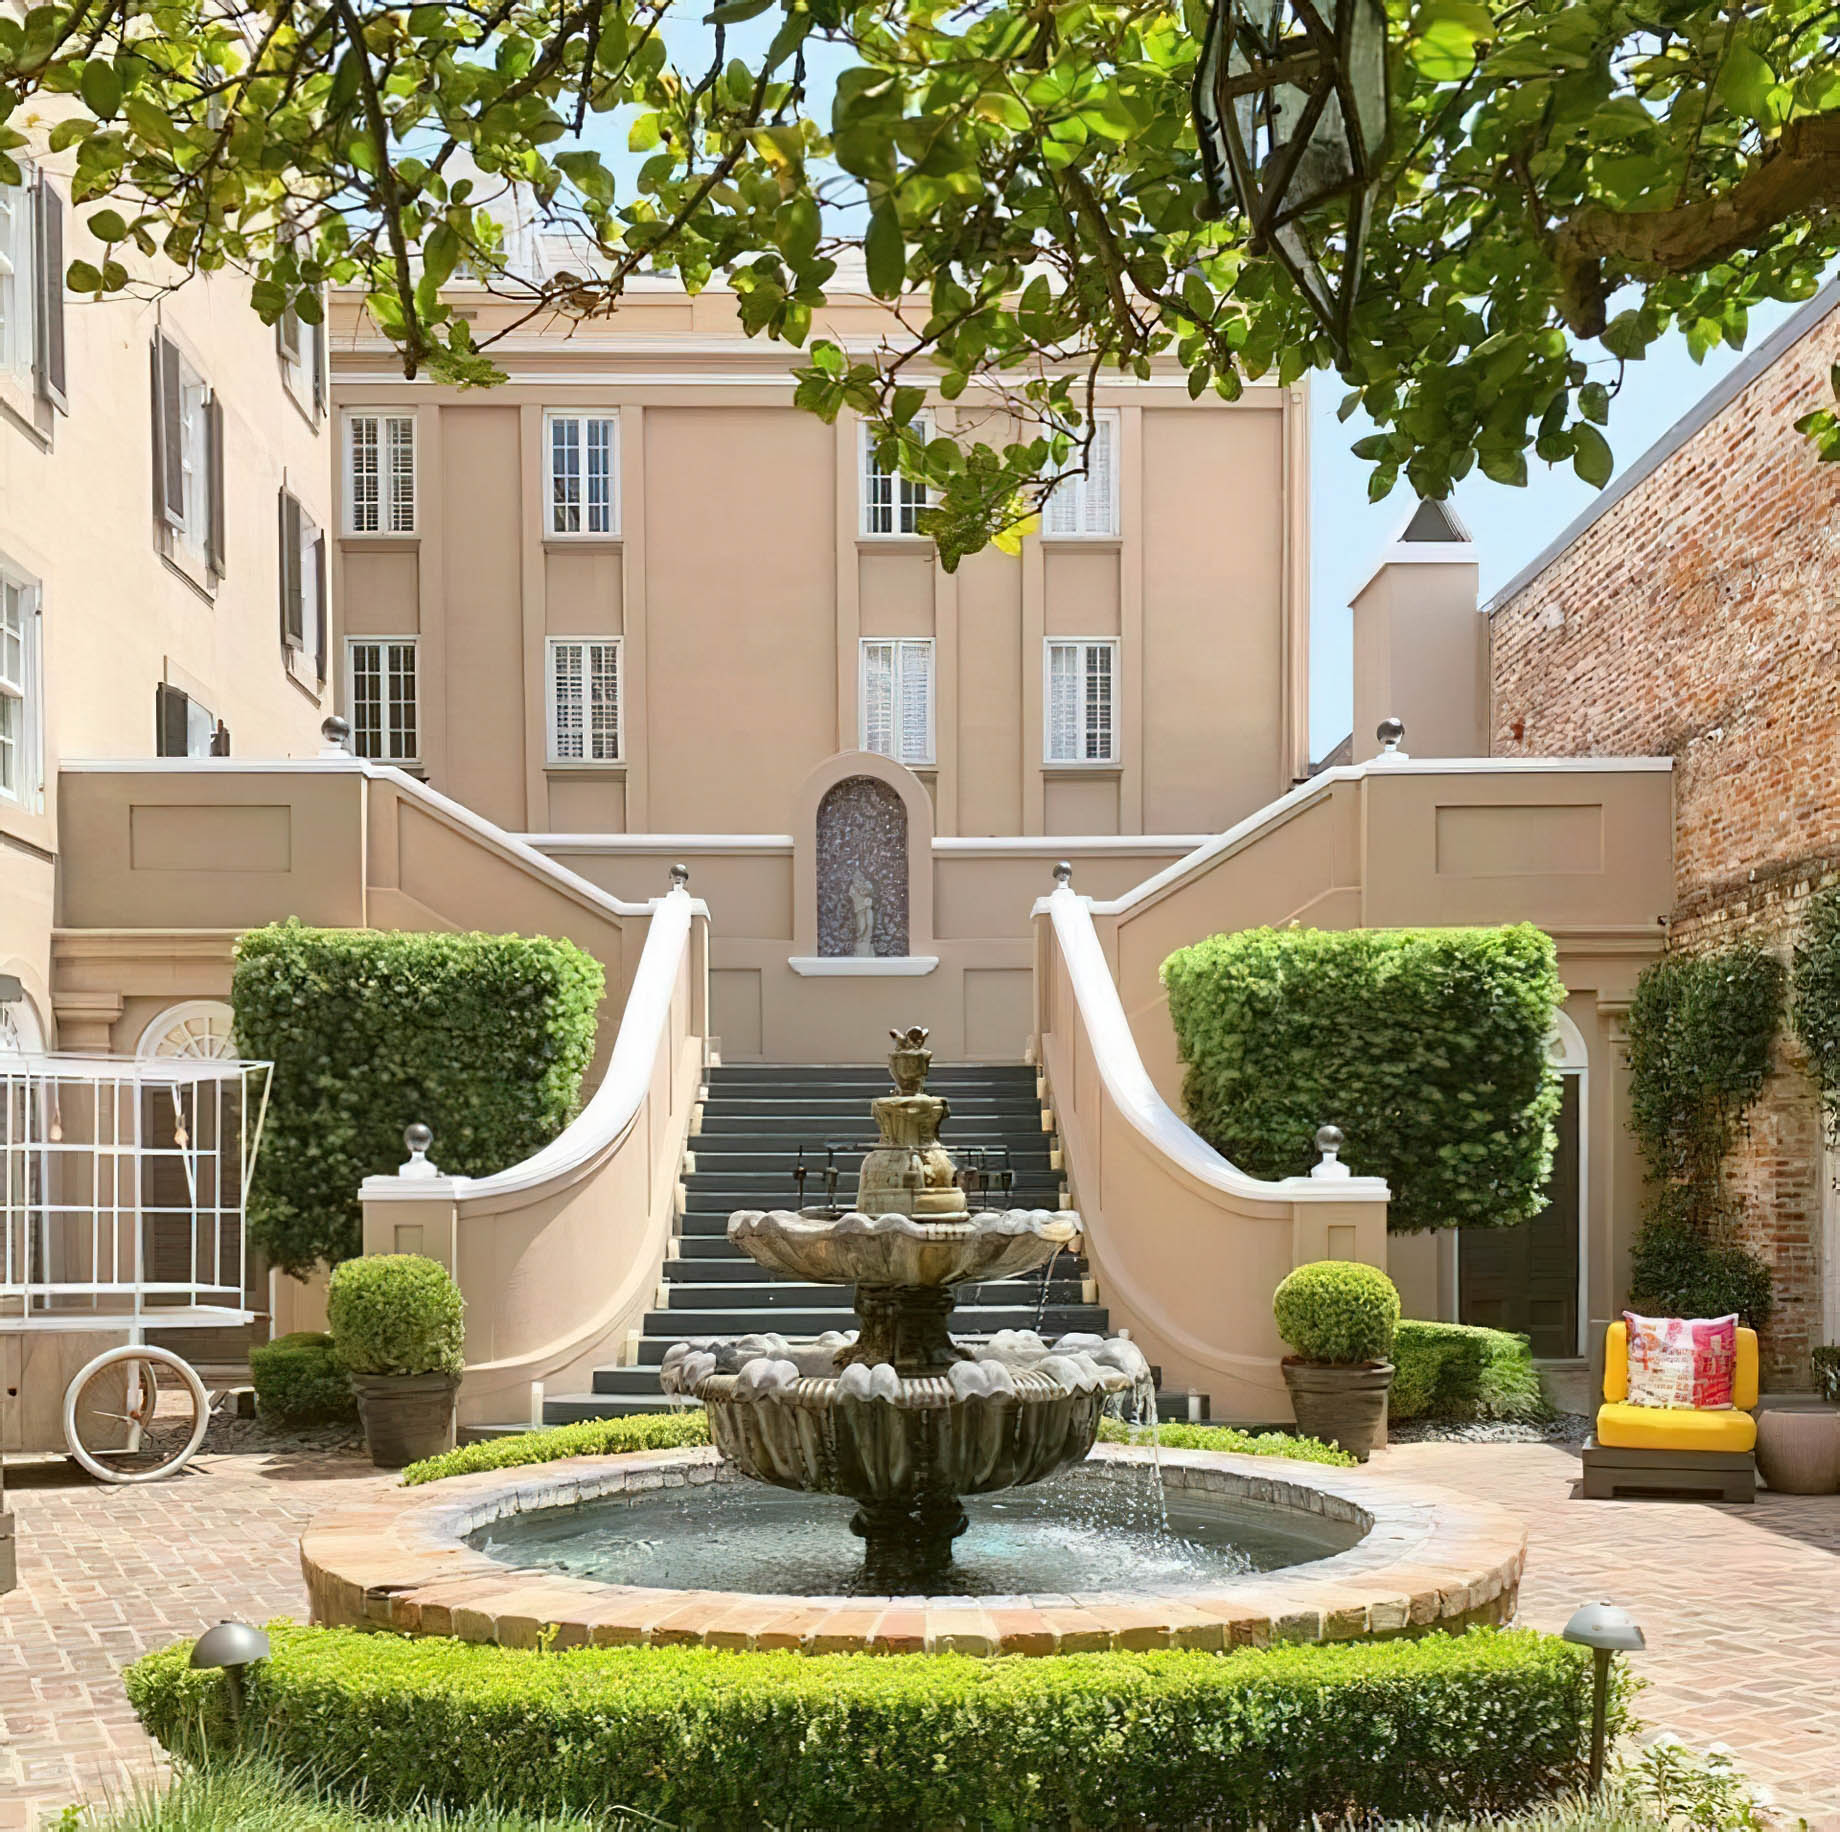 W New Orleans French Quarter Hotel – New Orleans, LA, USA – Courtyard Fountain